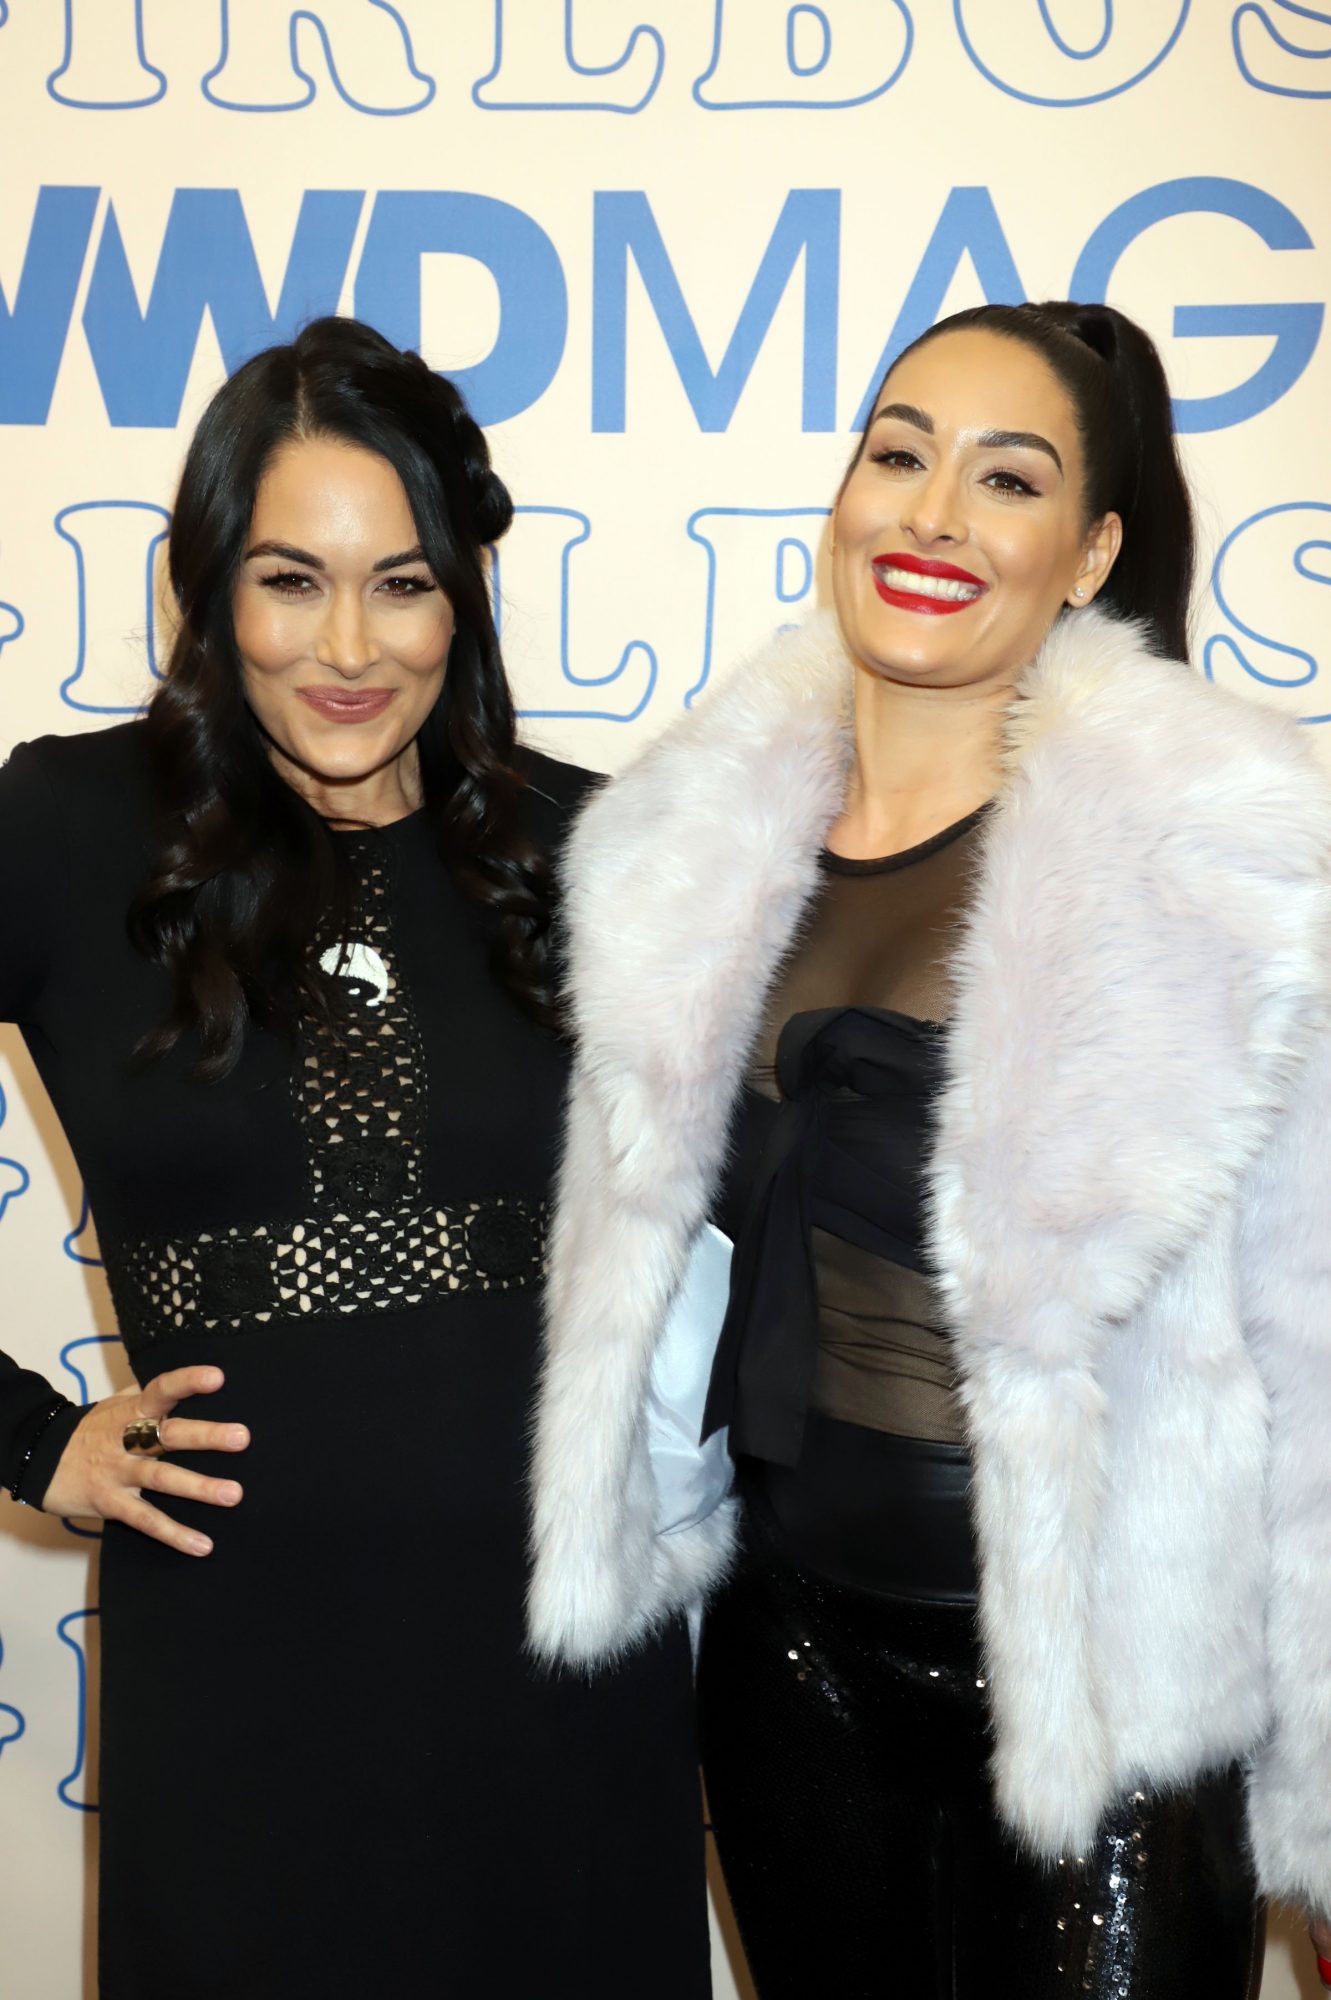 Nikki Bella and Brie Bella Show Off Baby Bumps During Lunch